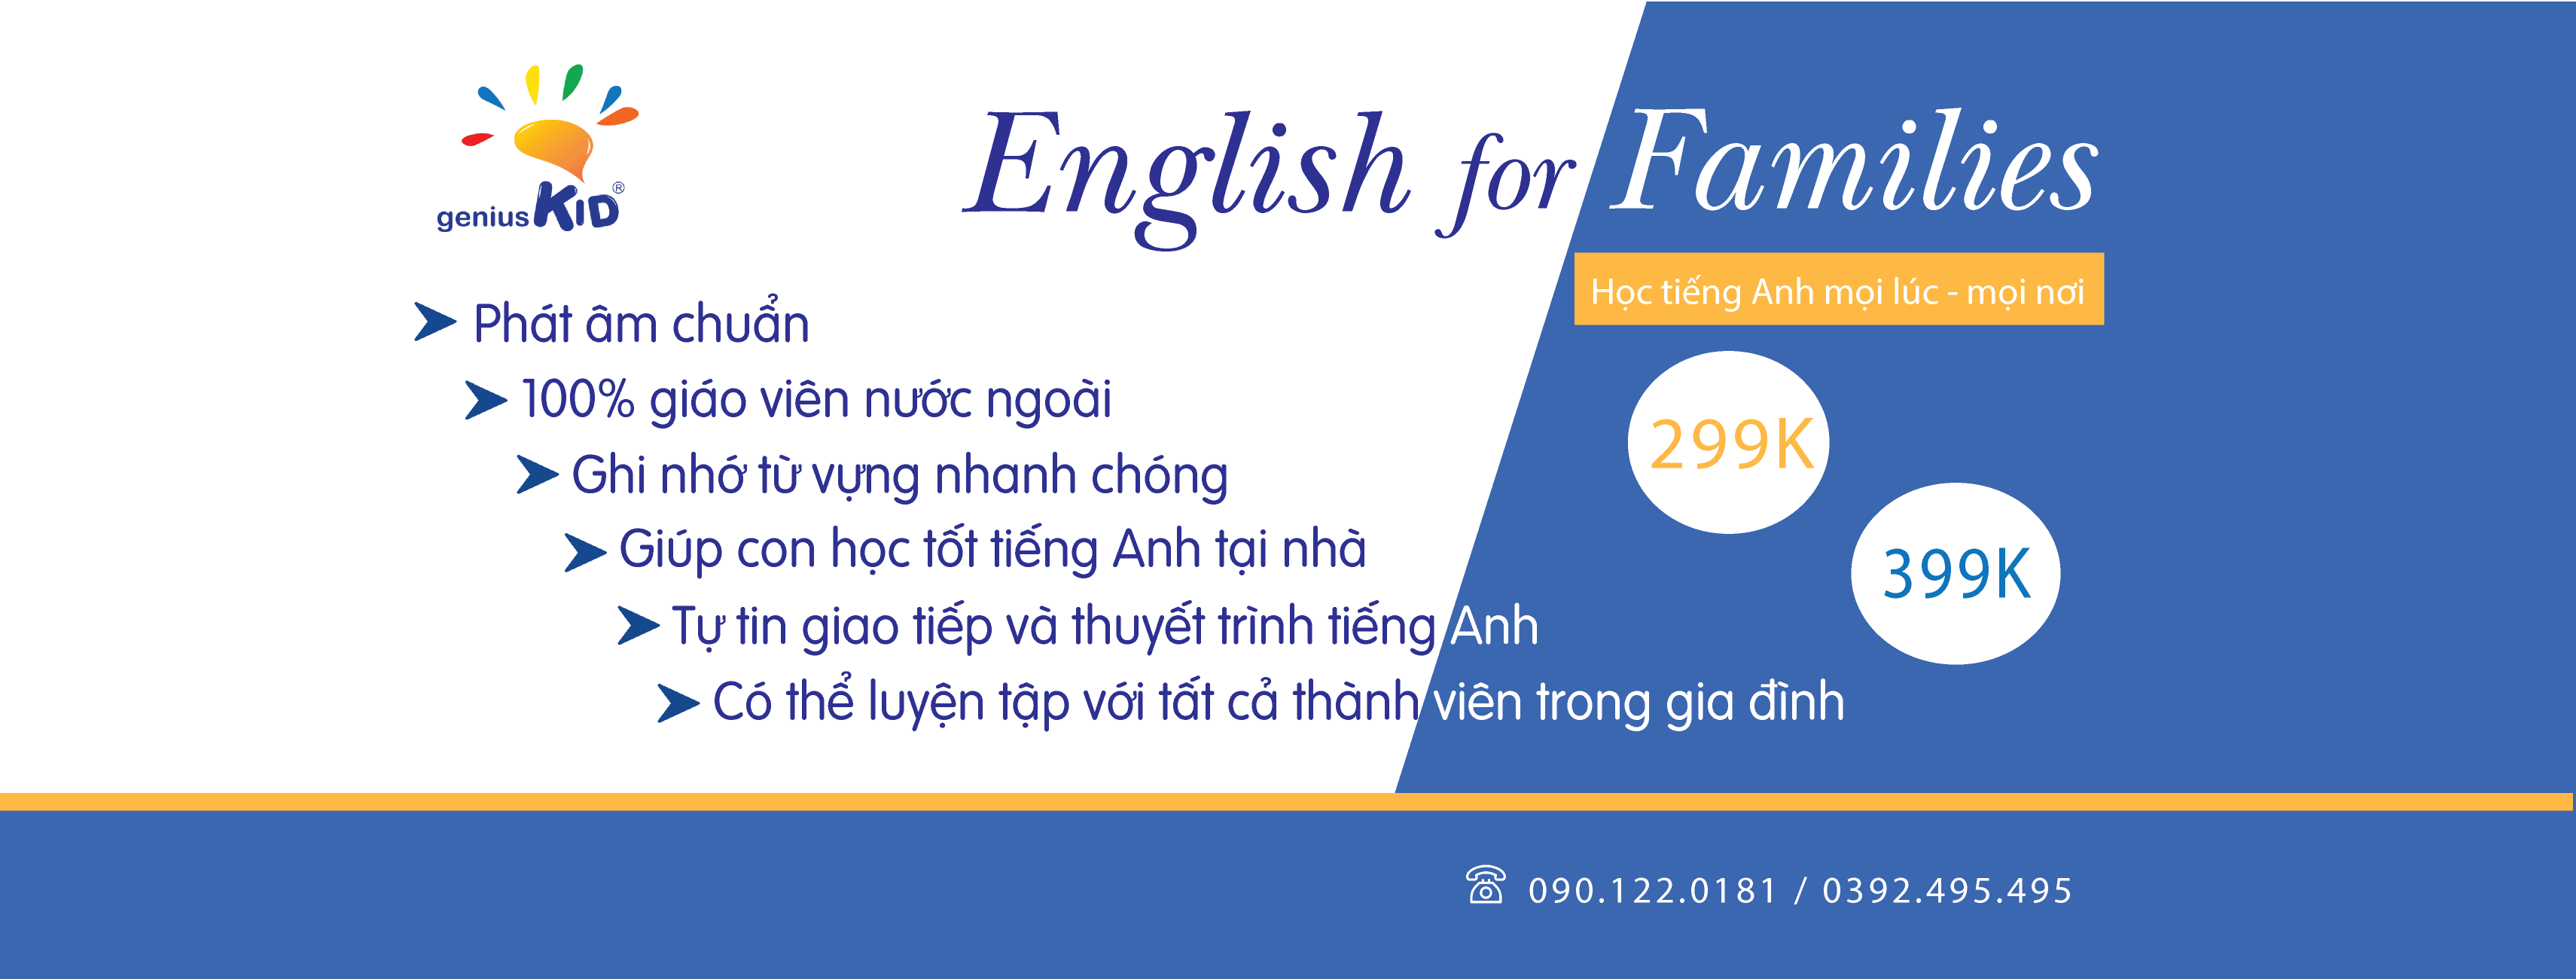 English for Families